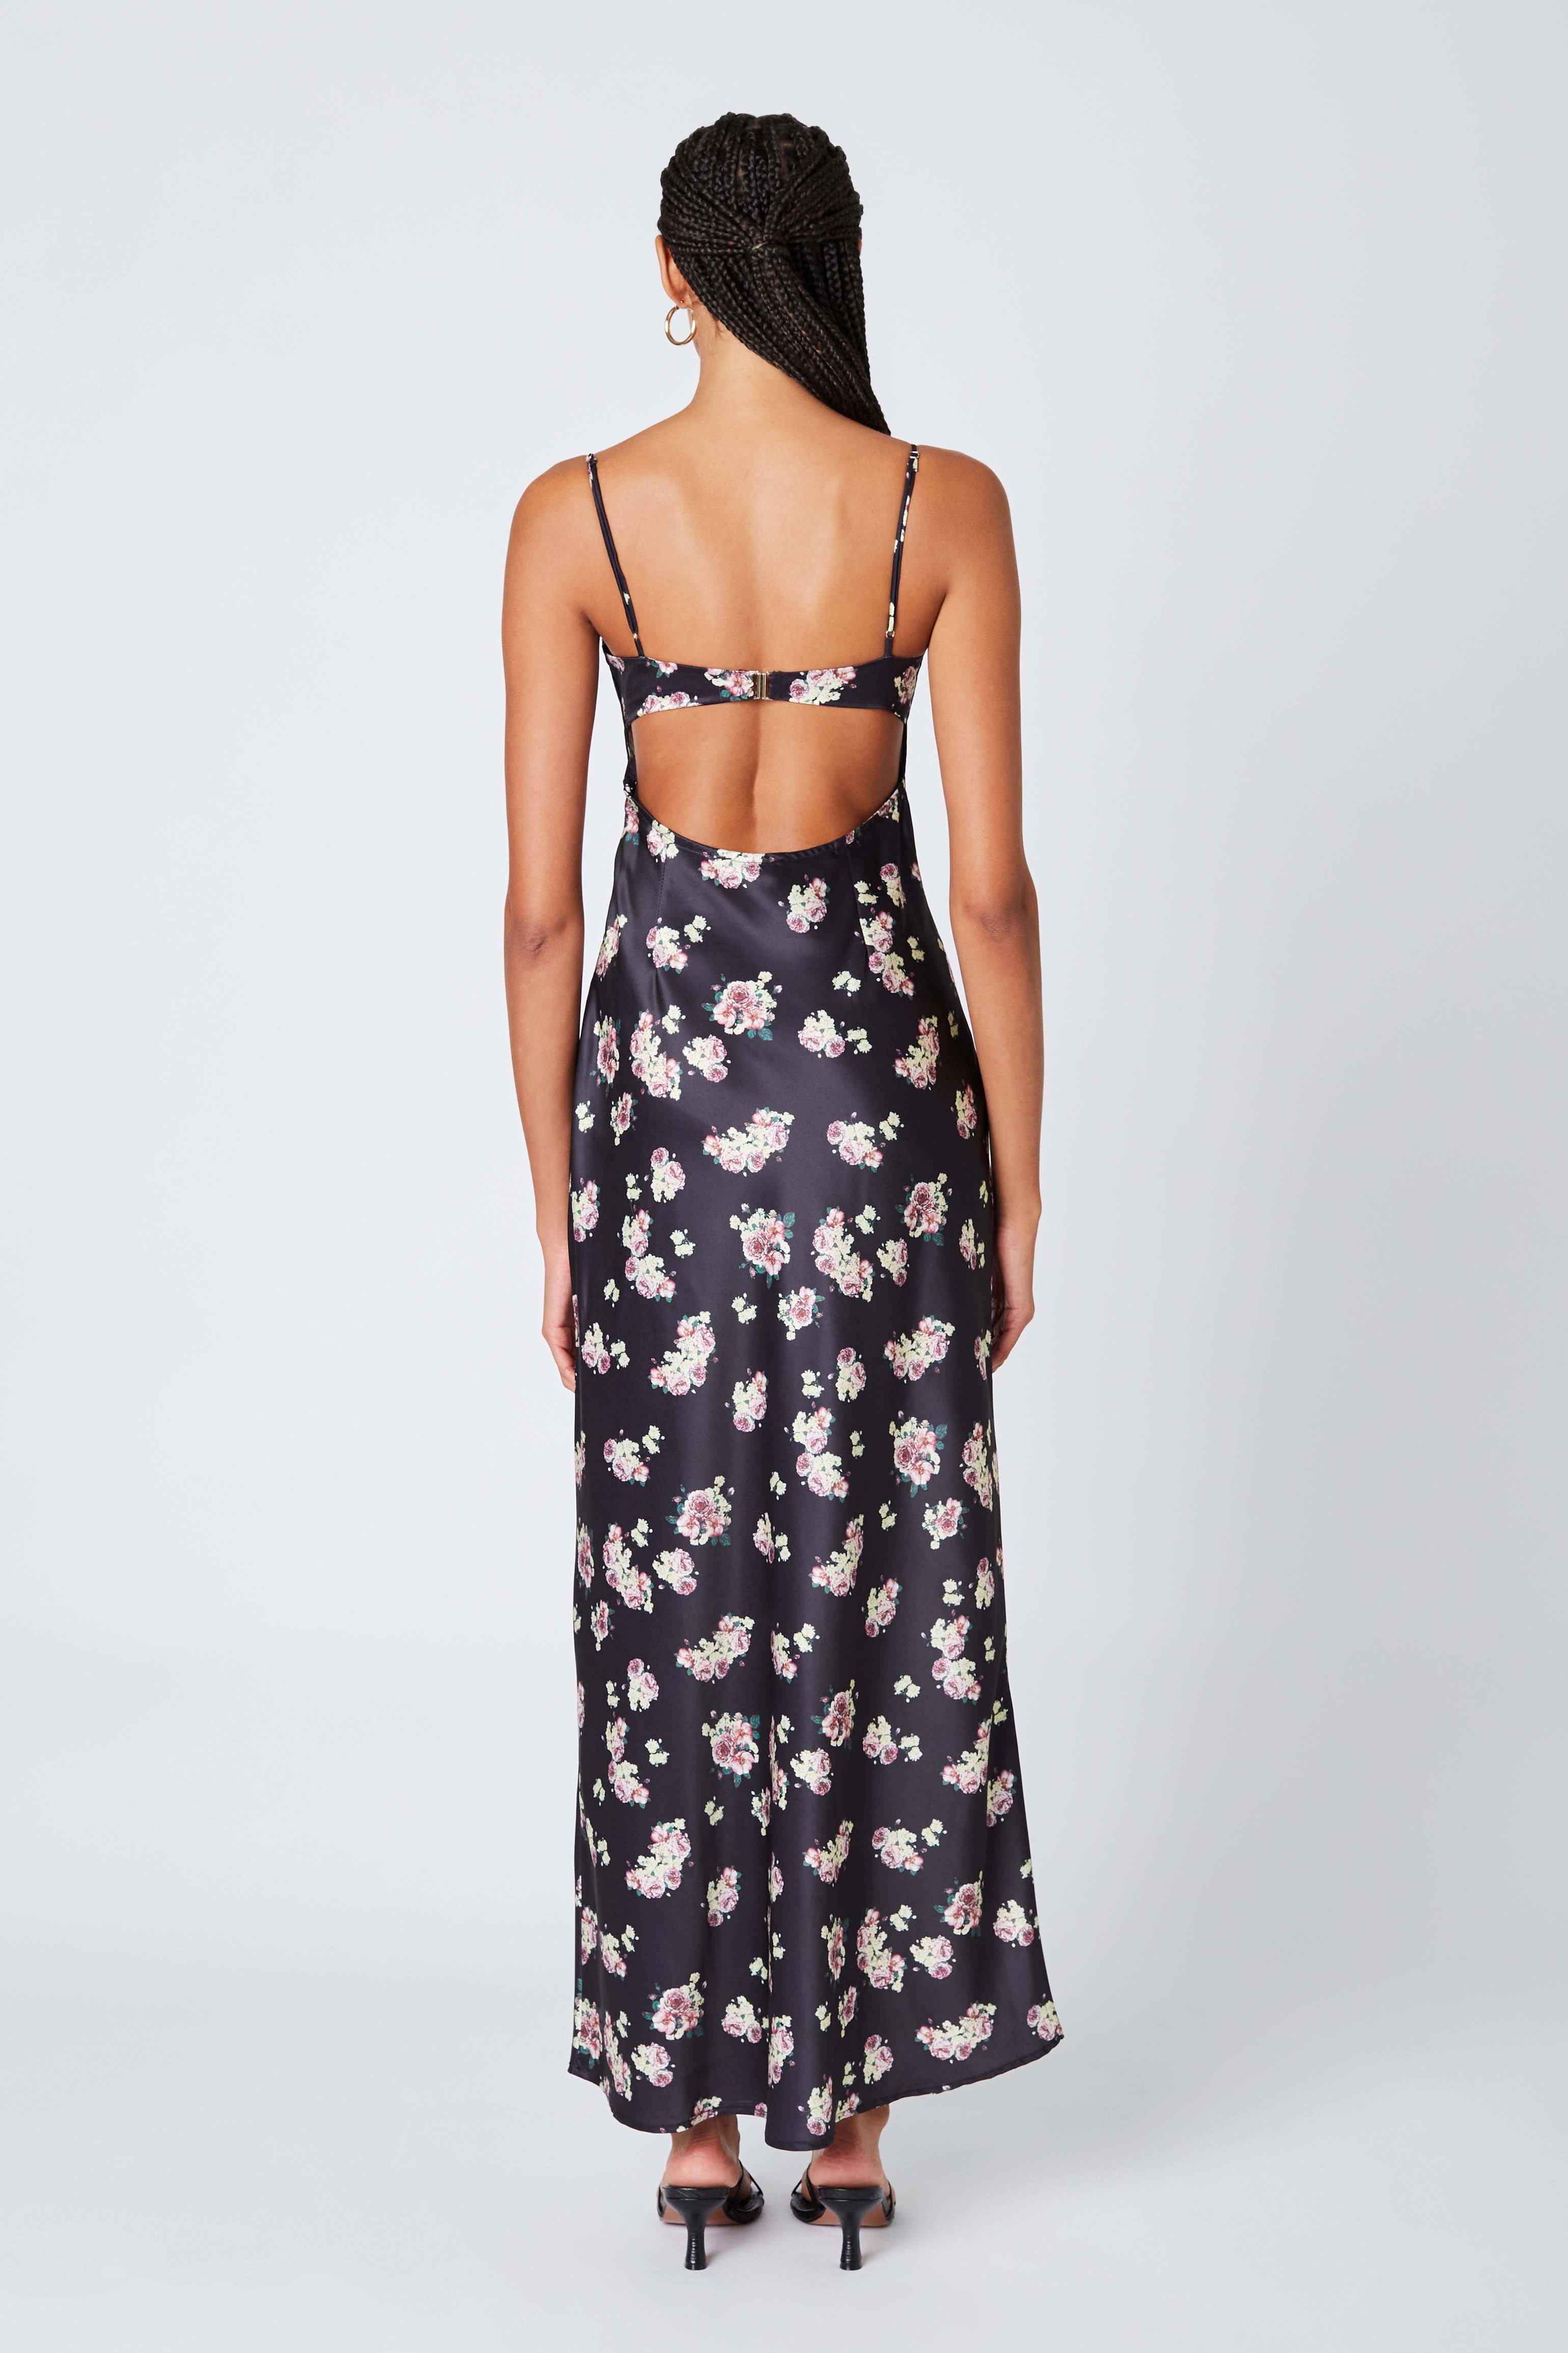 Corset Floral Maxi Dress in Black Back View